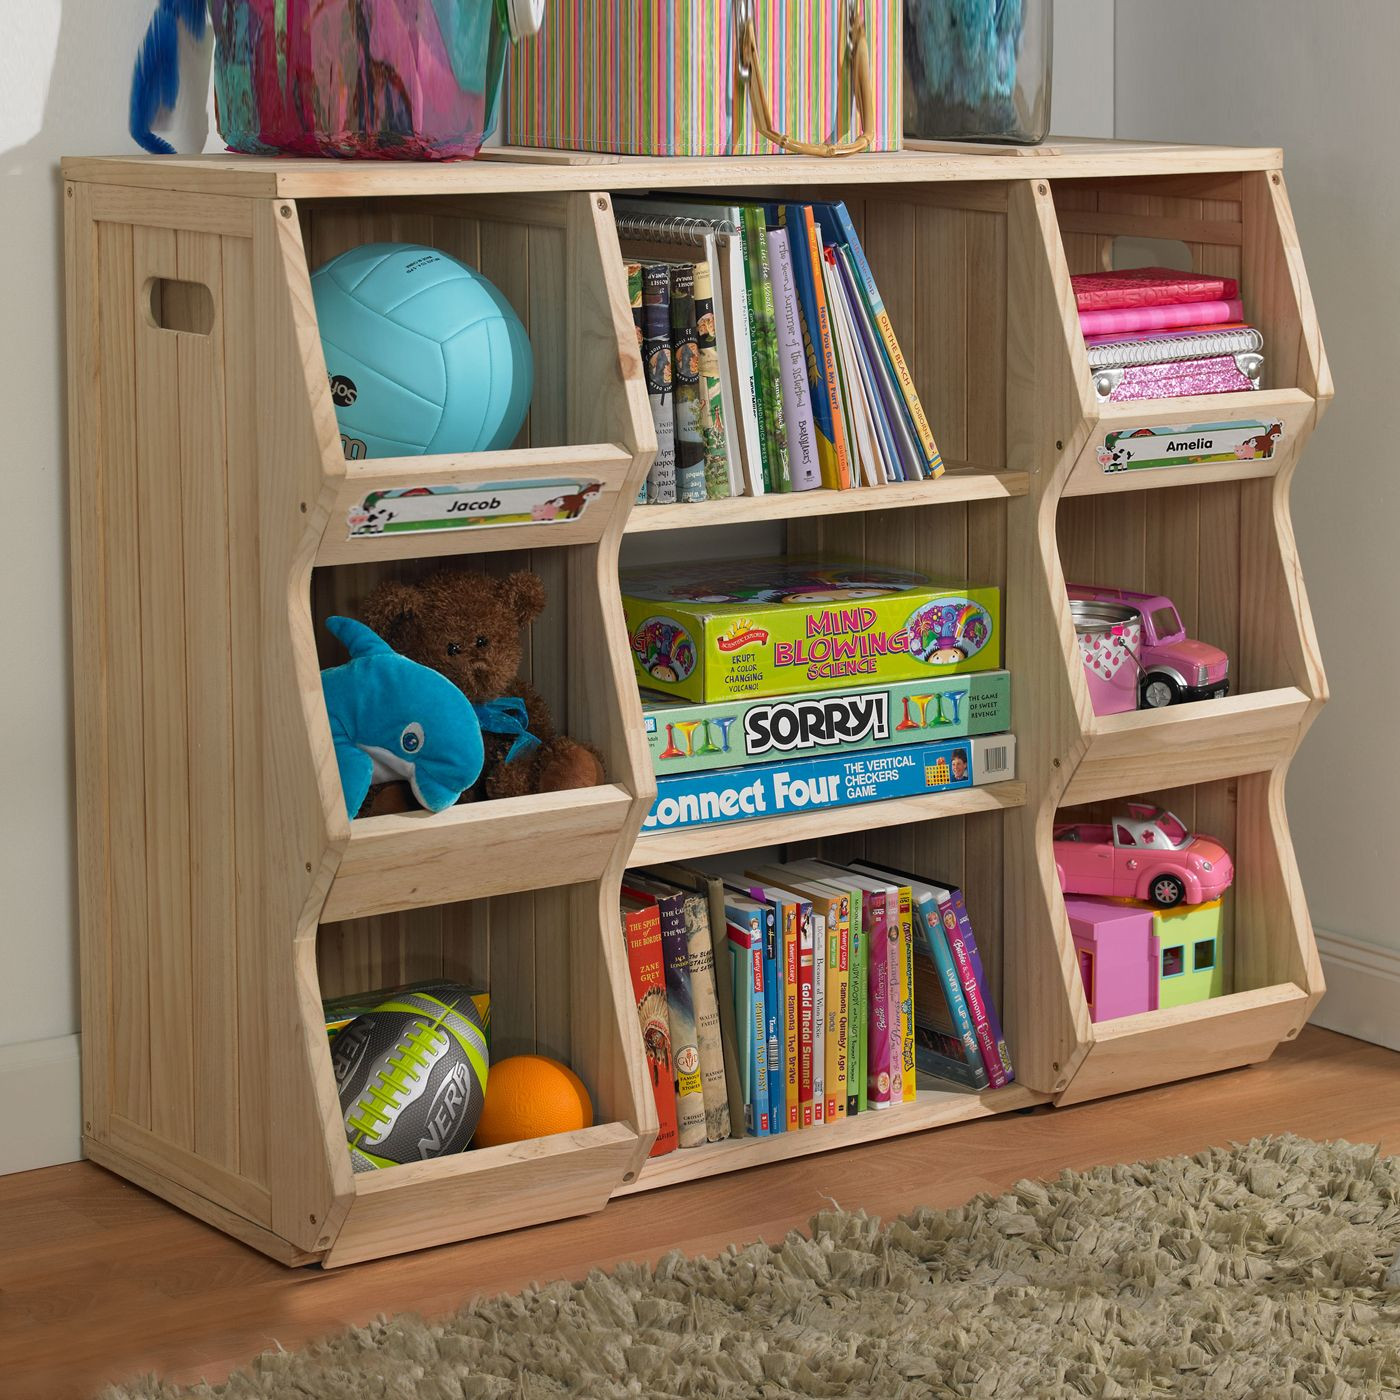 Bookcases For Kids Room
 Merry Products SLF Children s Bookshelf Cubby